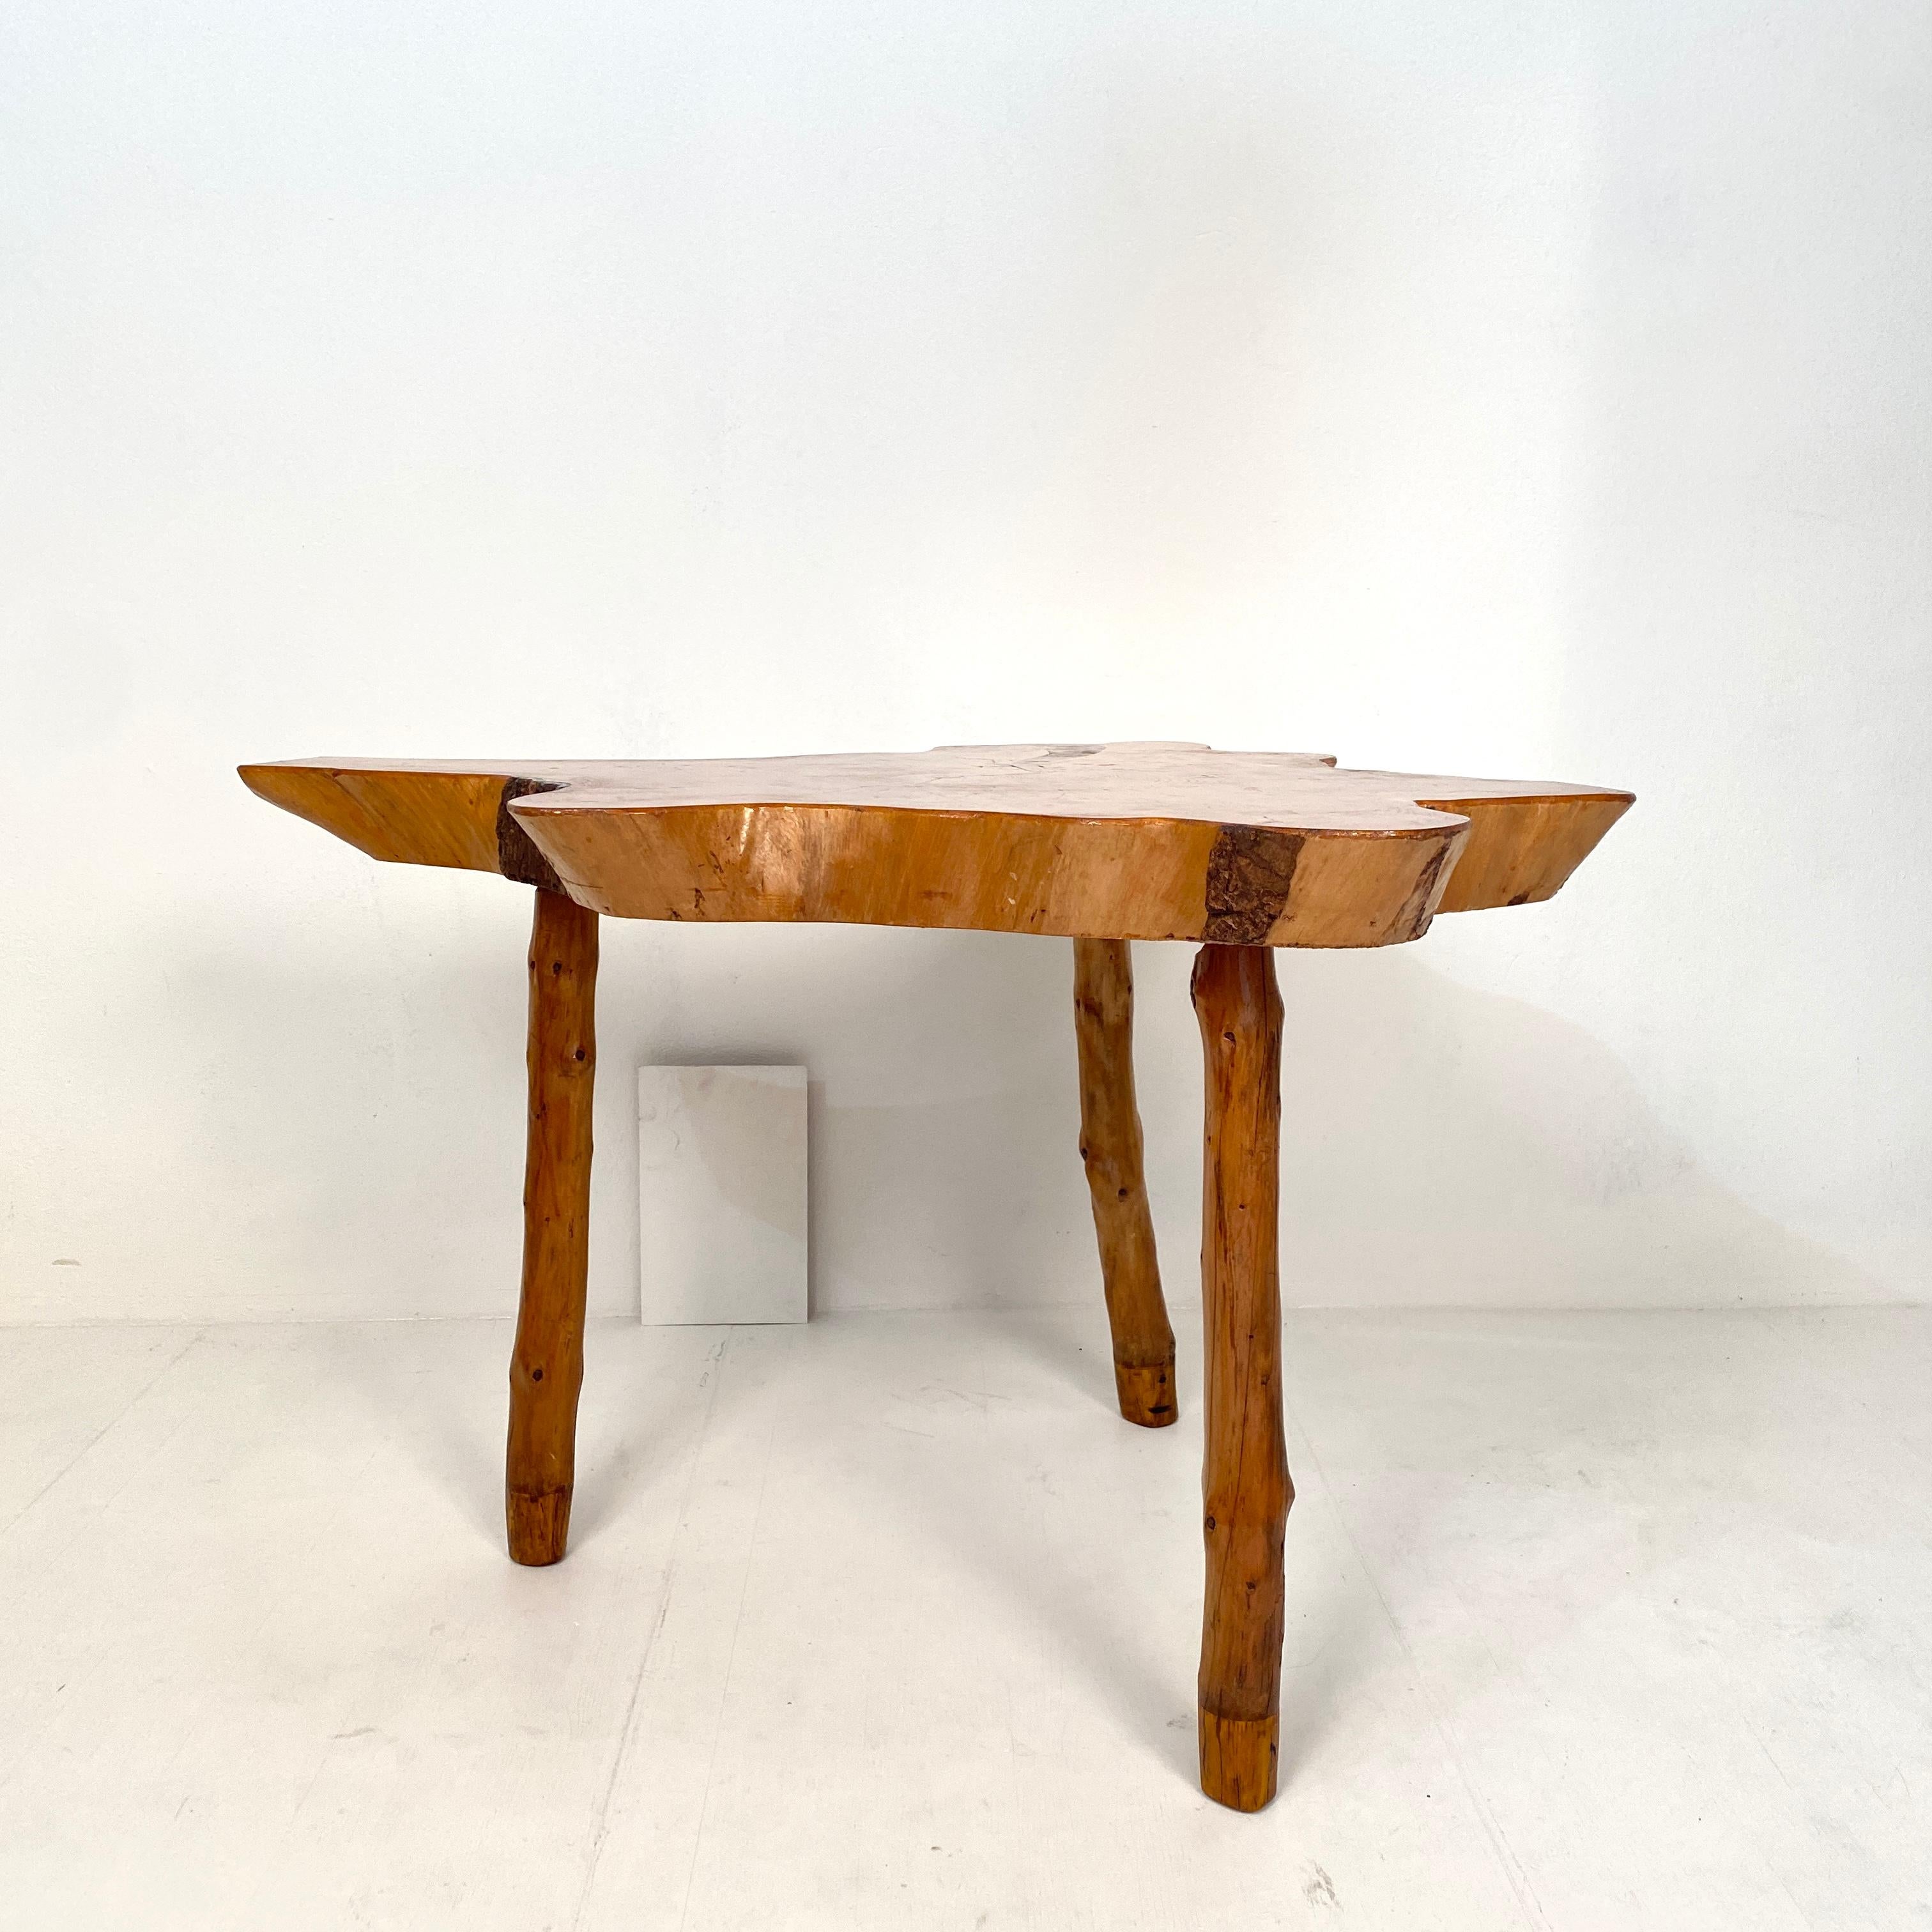 This beautiful 20th century primitive Scandinavian tree trunk table was made circa 1920.
It can be used as centre table, writing desk or dining table.
The table top has got a great shape and the it has got three legs, which have got repairs on the